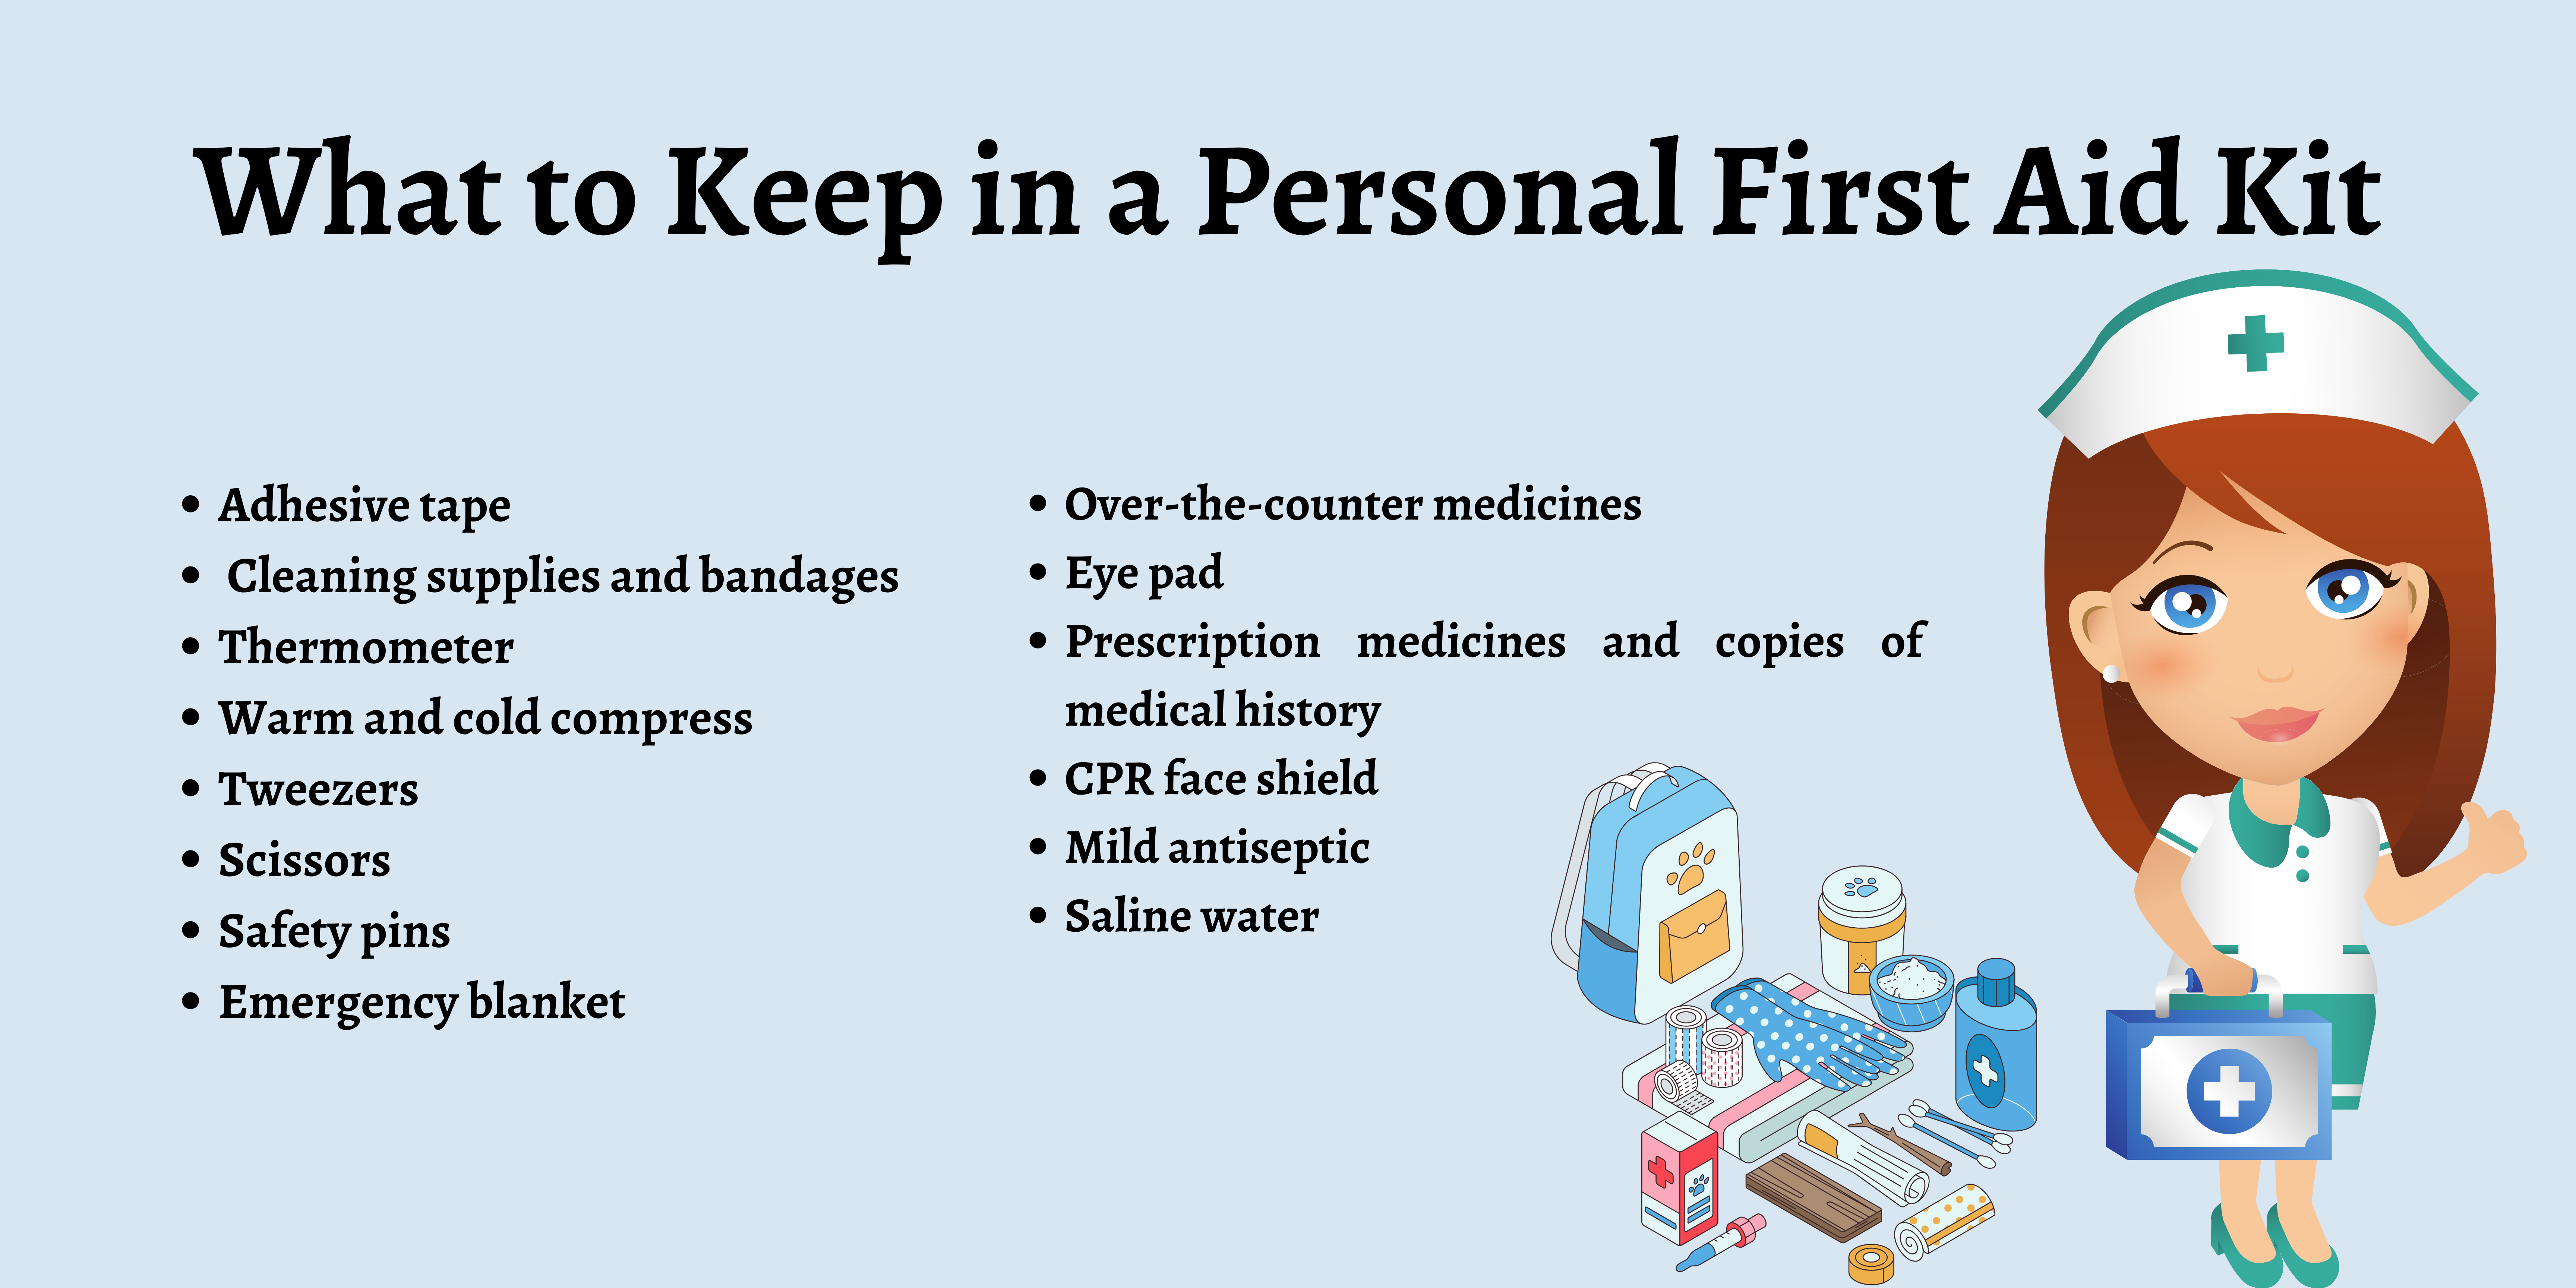 https://www.firstaidforfree.com/wp-content/uploads/2023/05/What-to-Keep-in-a-Personal-First-Aid-Kit.png